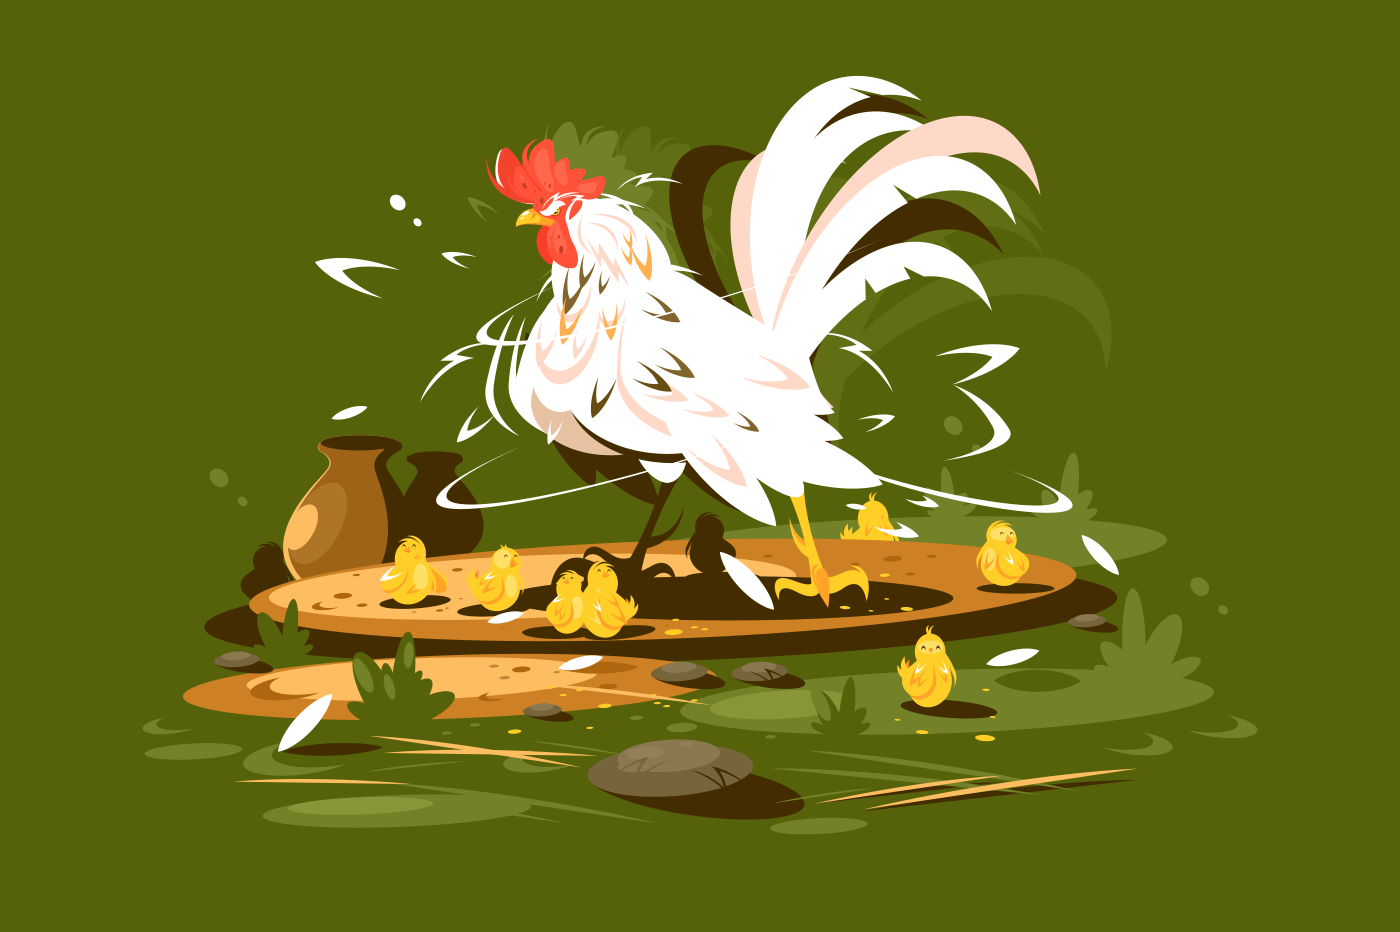 Rooster daddy with yellow chickens. Bird family on farm. Vector illustration